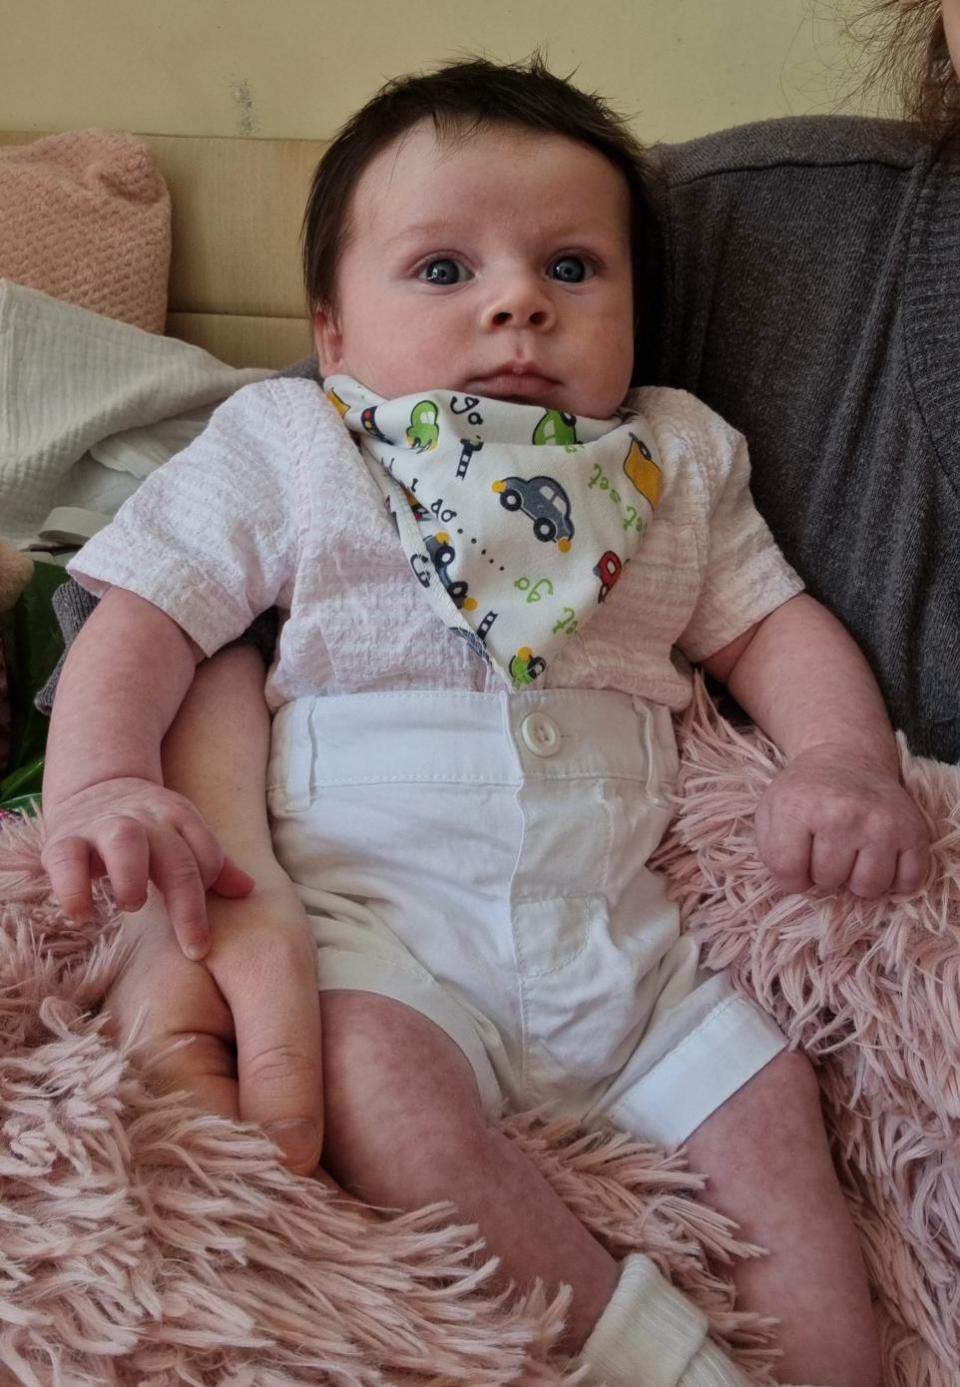 South Wales Argus: Rafe Logan Laidlaw was born on February 18, 2024, at the Grange University Hospital, near Cwmbran, weighing 8lb 15oz. He is the first child of Chloe Witcombe and Connor Holyoake-Laidlaw, of Pontypool.